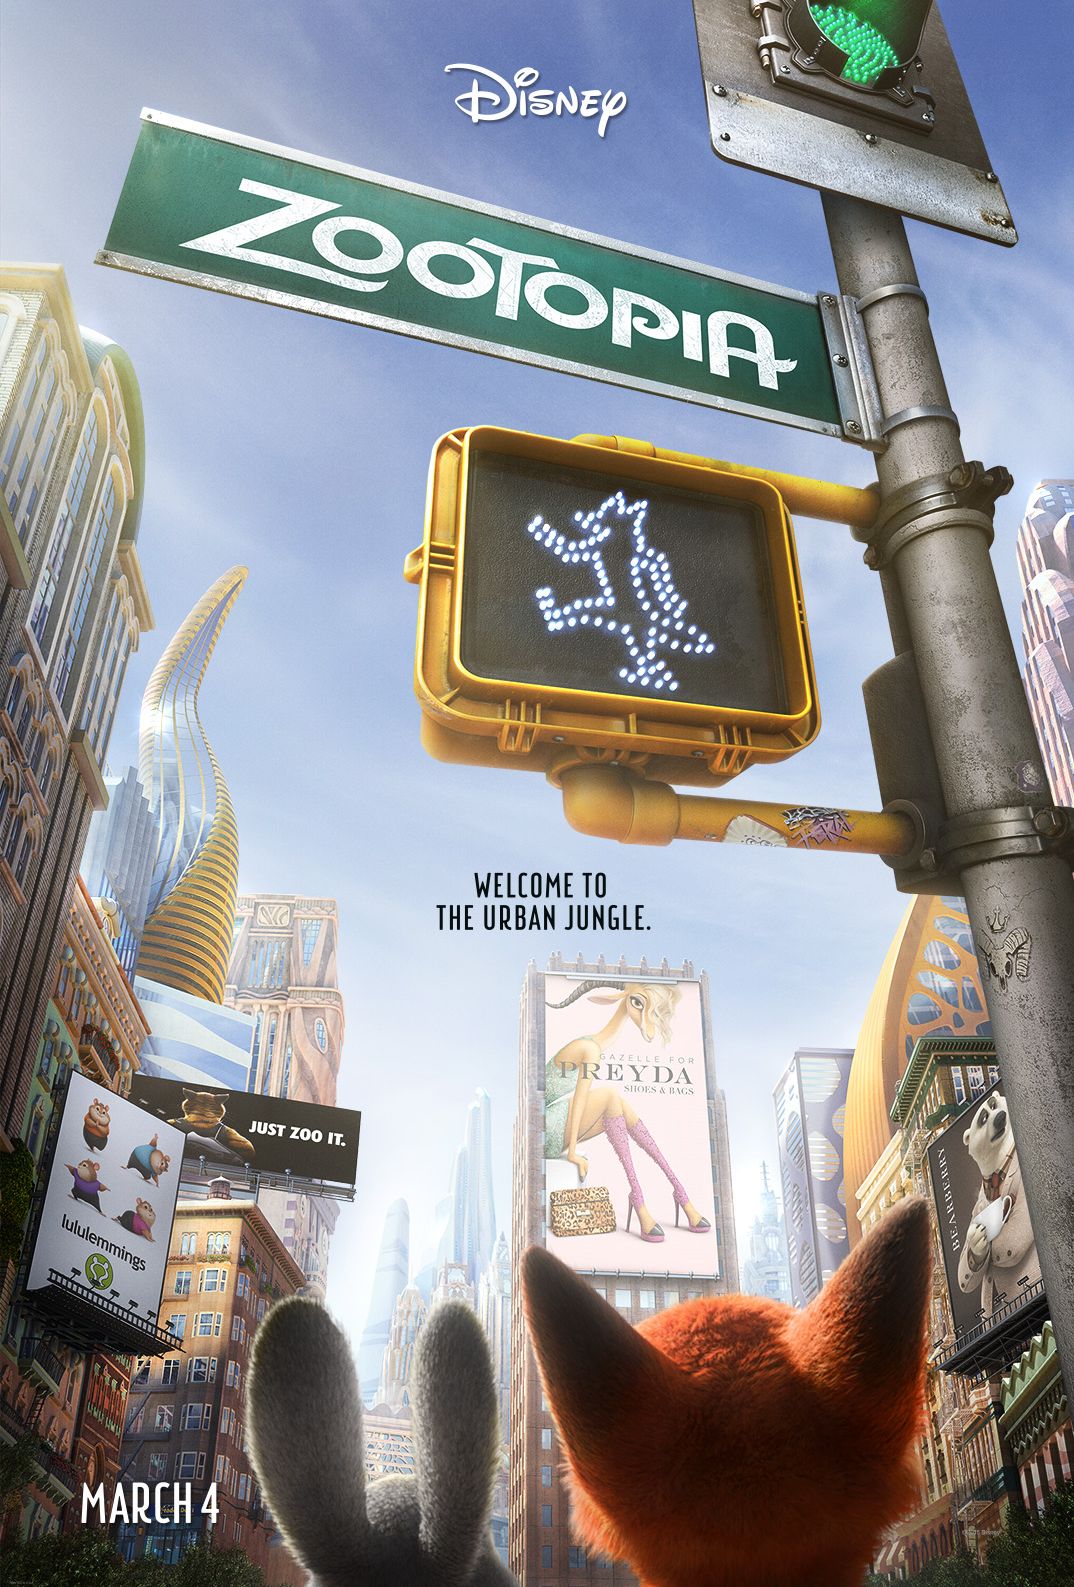 The new poster for Disney's 'Zootopia' coming to theaters Ma